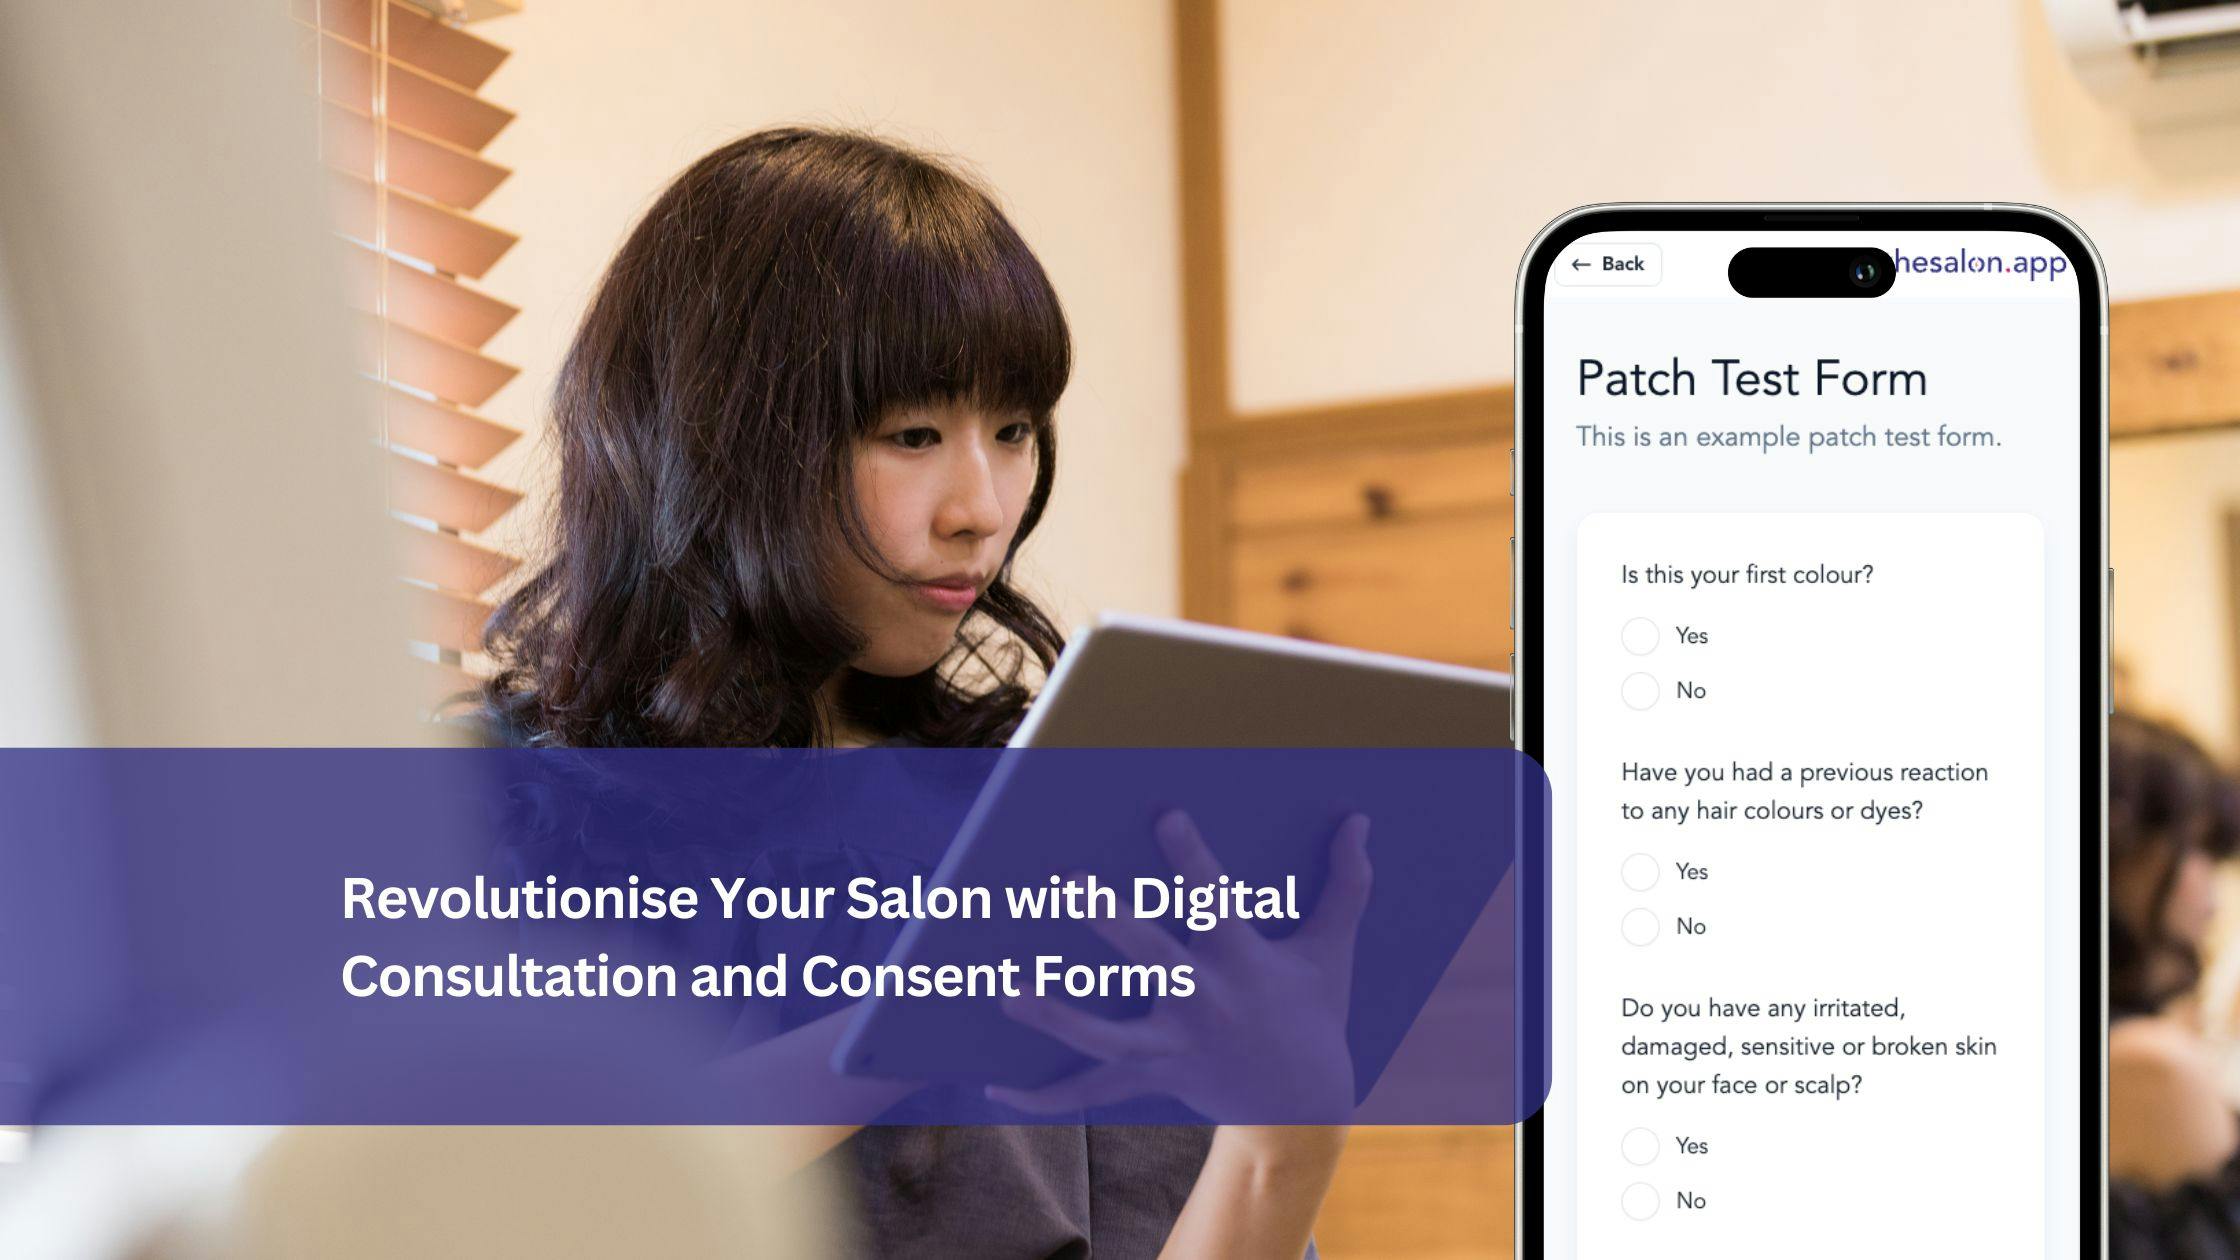 Revolutionise Your Salon with Digital Consultation and Consent Forms